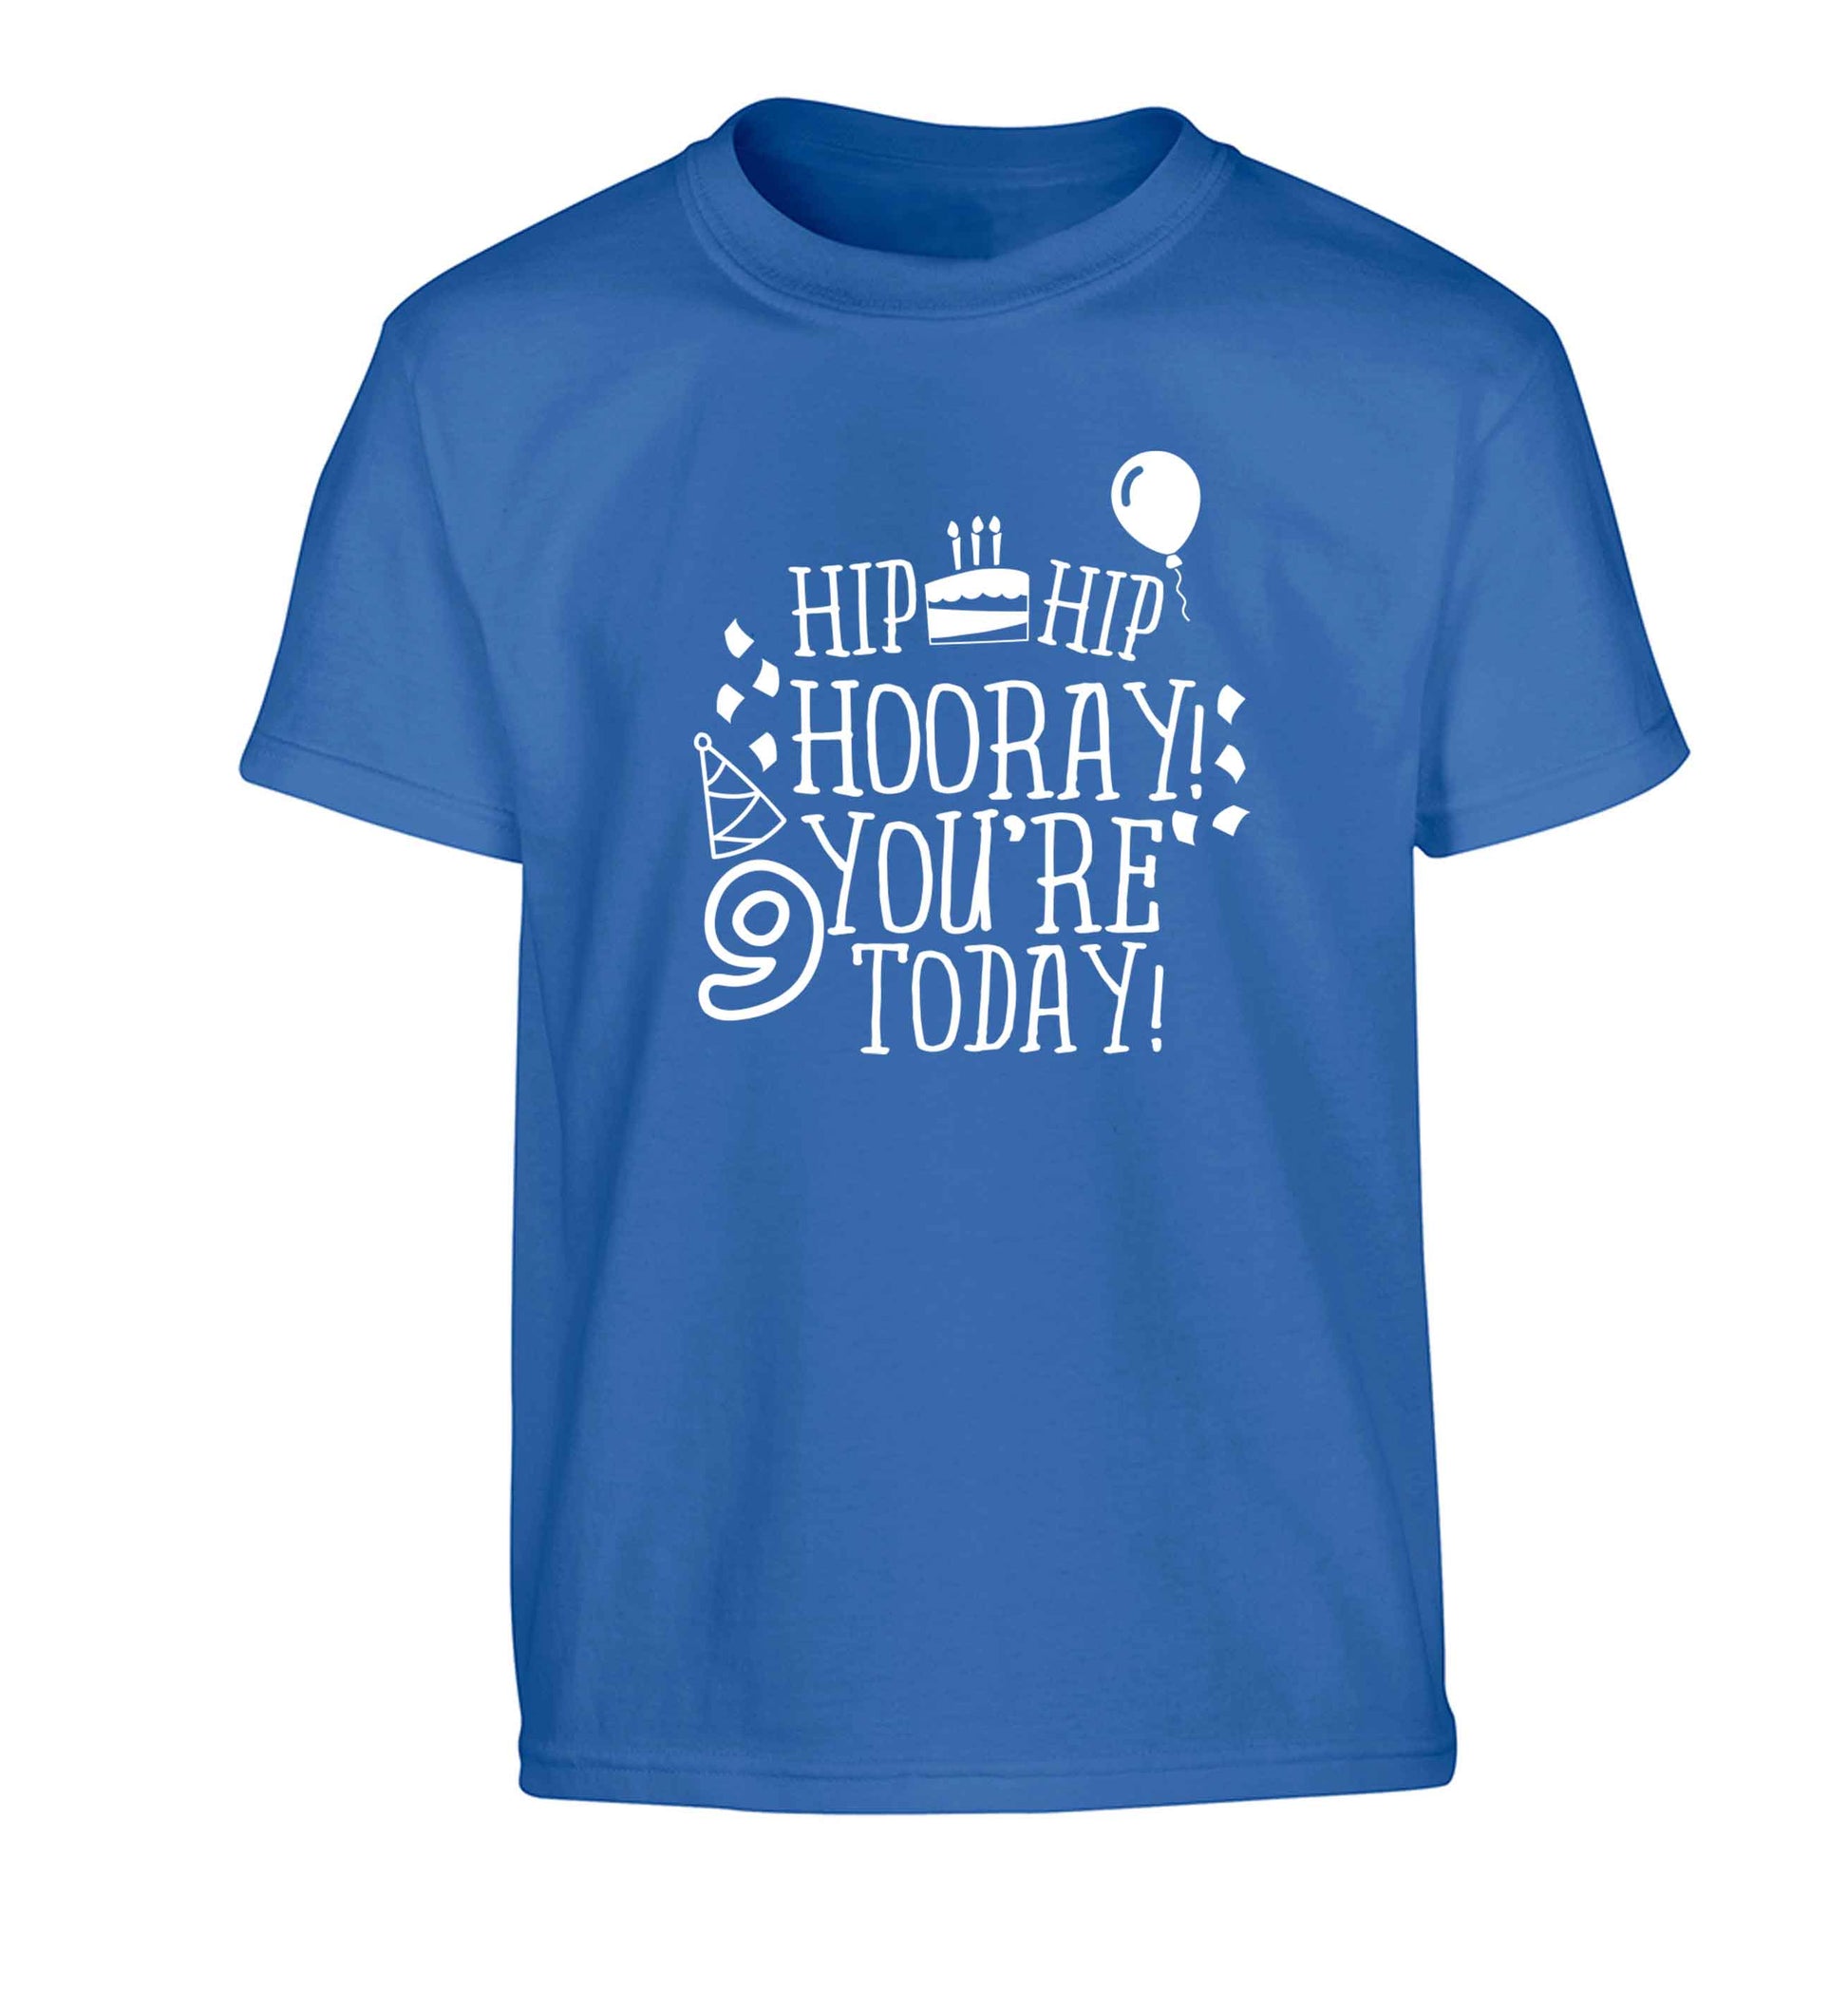 Hip hip hooray you're 9 today! Children's blue Tshirt 12-13 Years